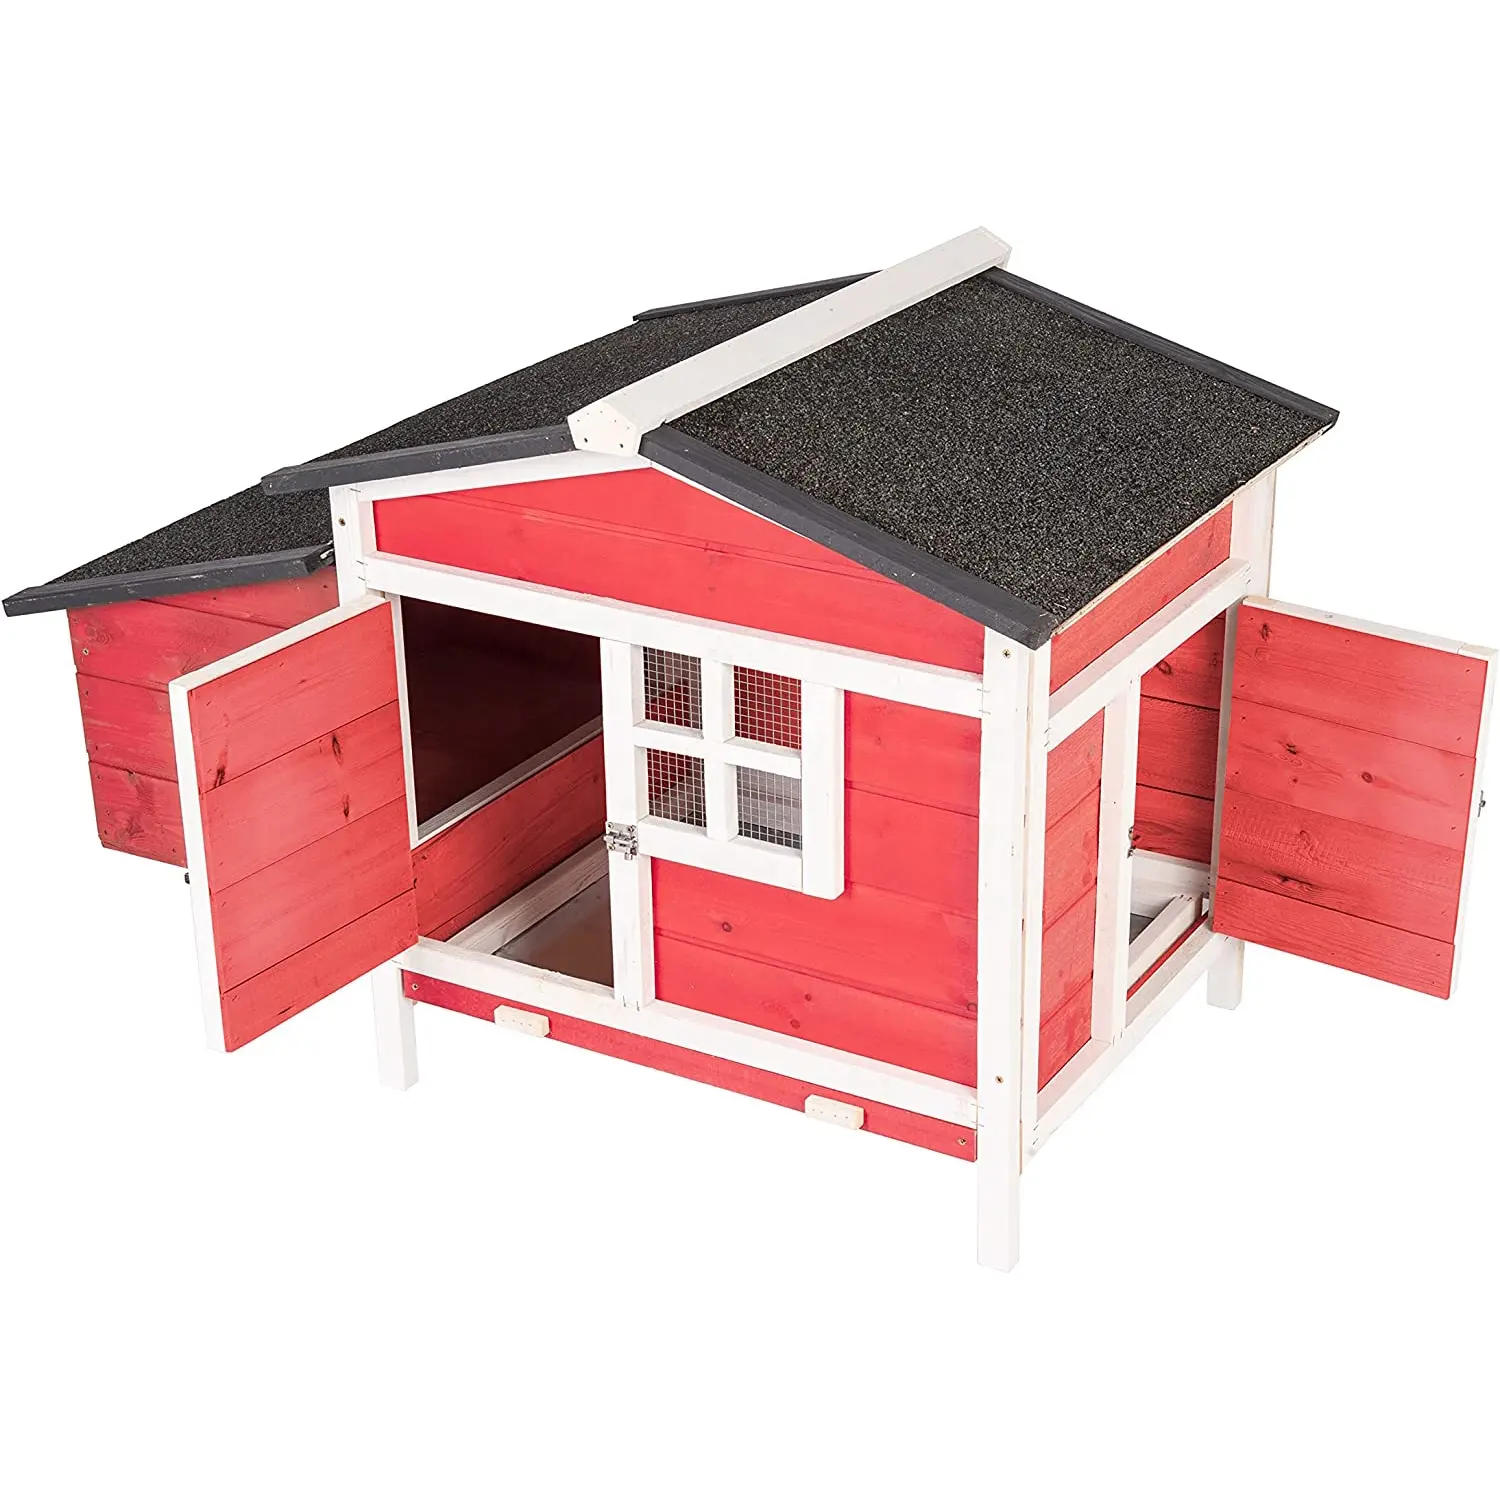 Outdoor Wooden Chicken Coop Hen House Poultry Cage Red with Tray, Ramp & Nesting Box for Indoor and Outdoor Use